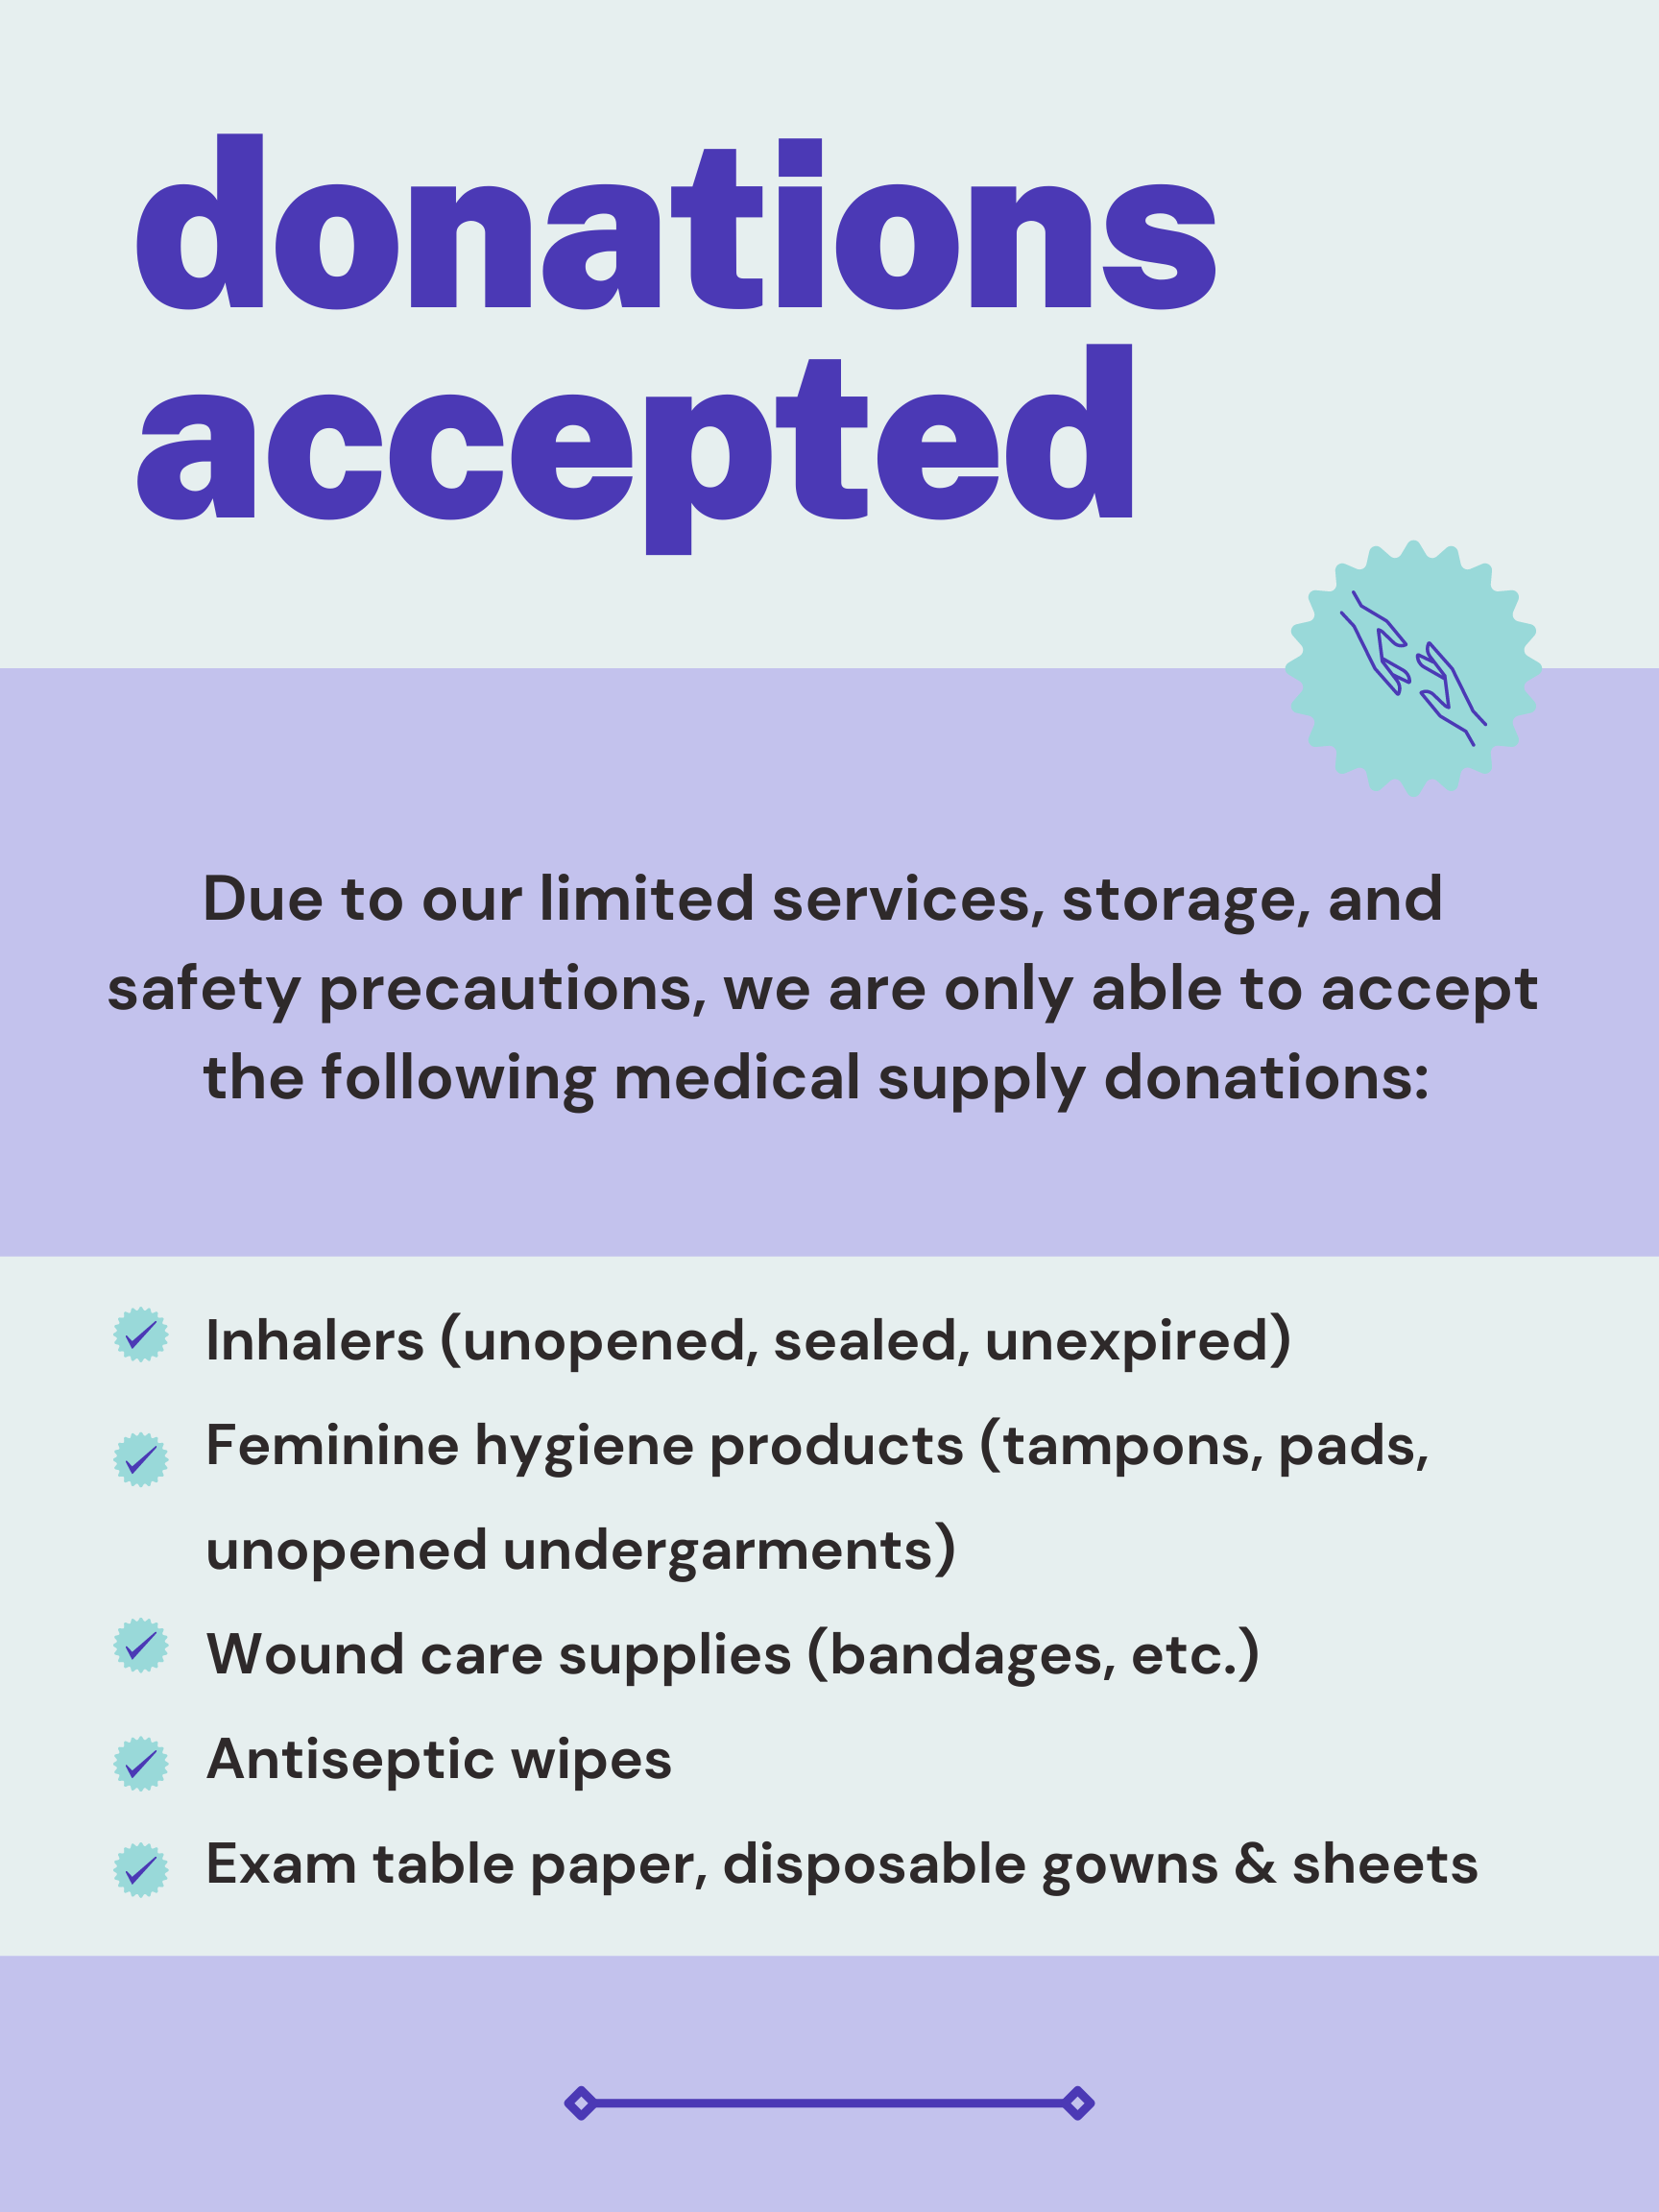 List of accepted donation items